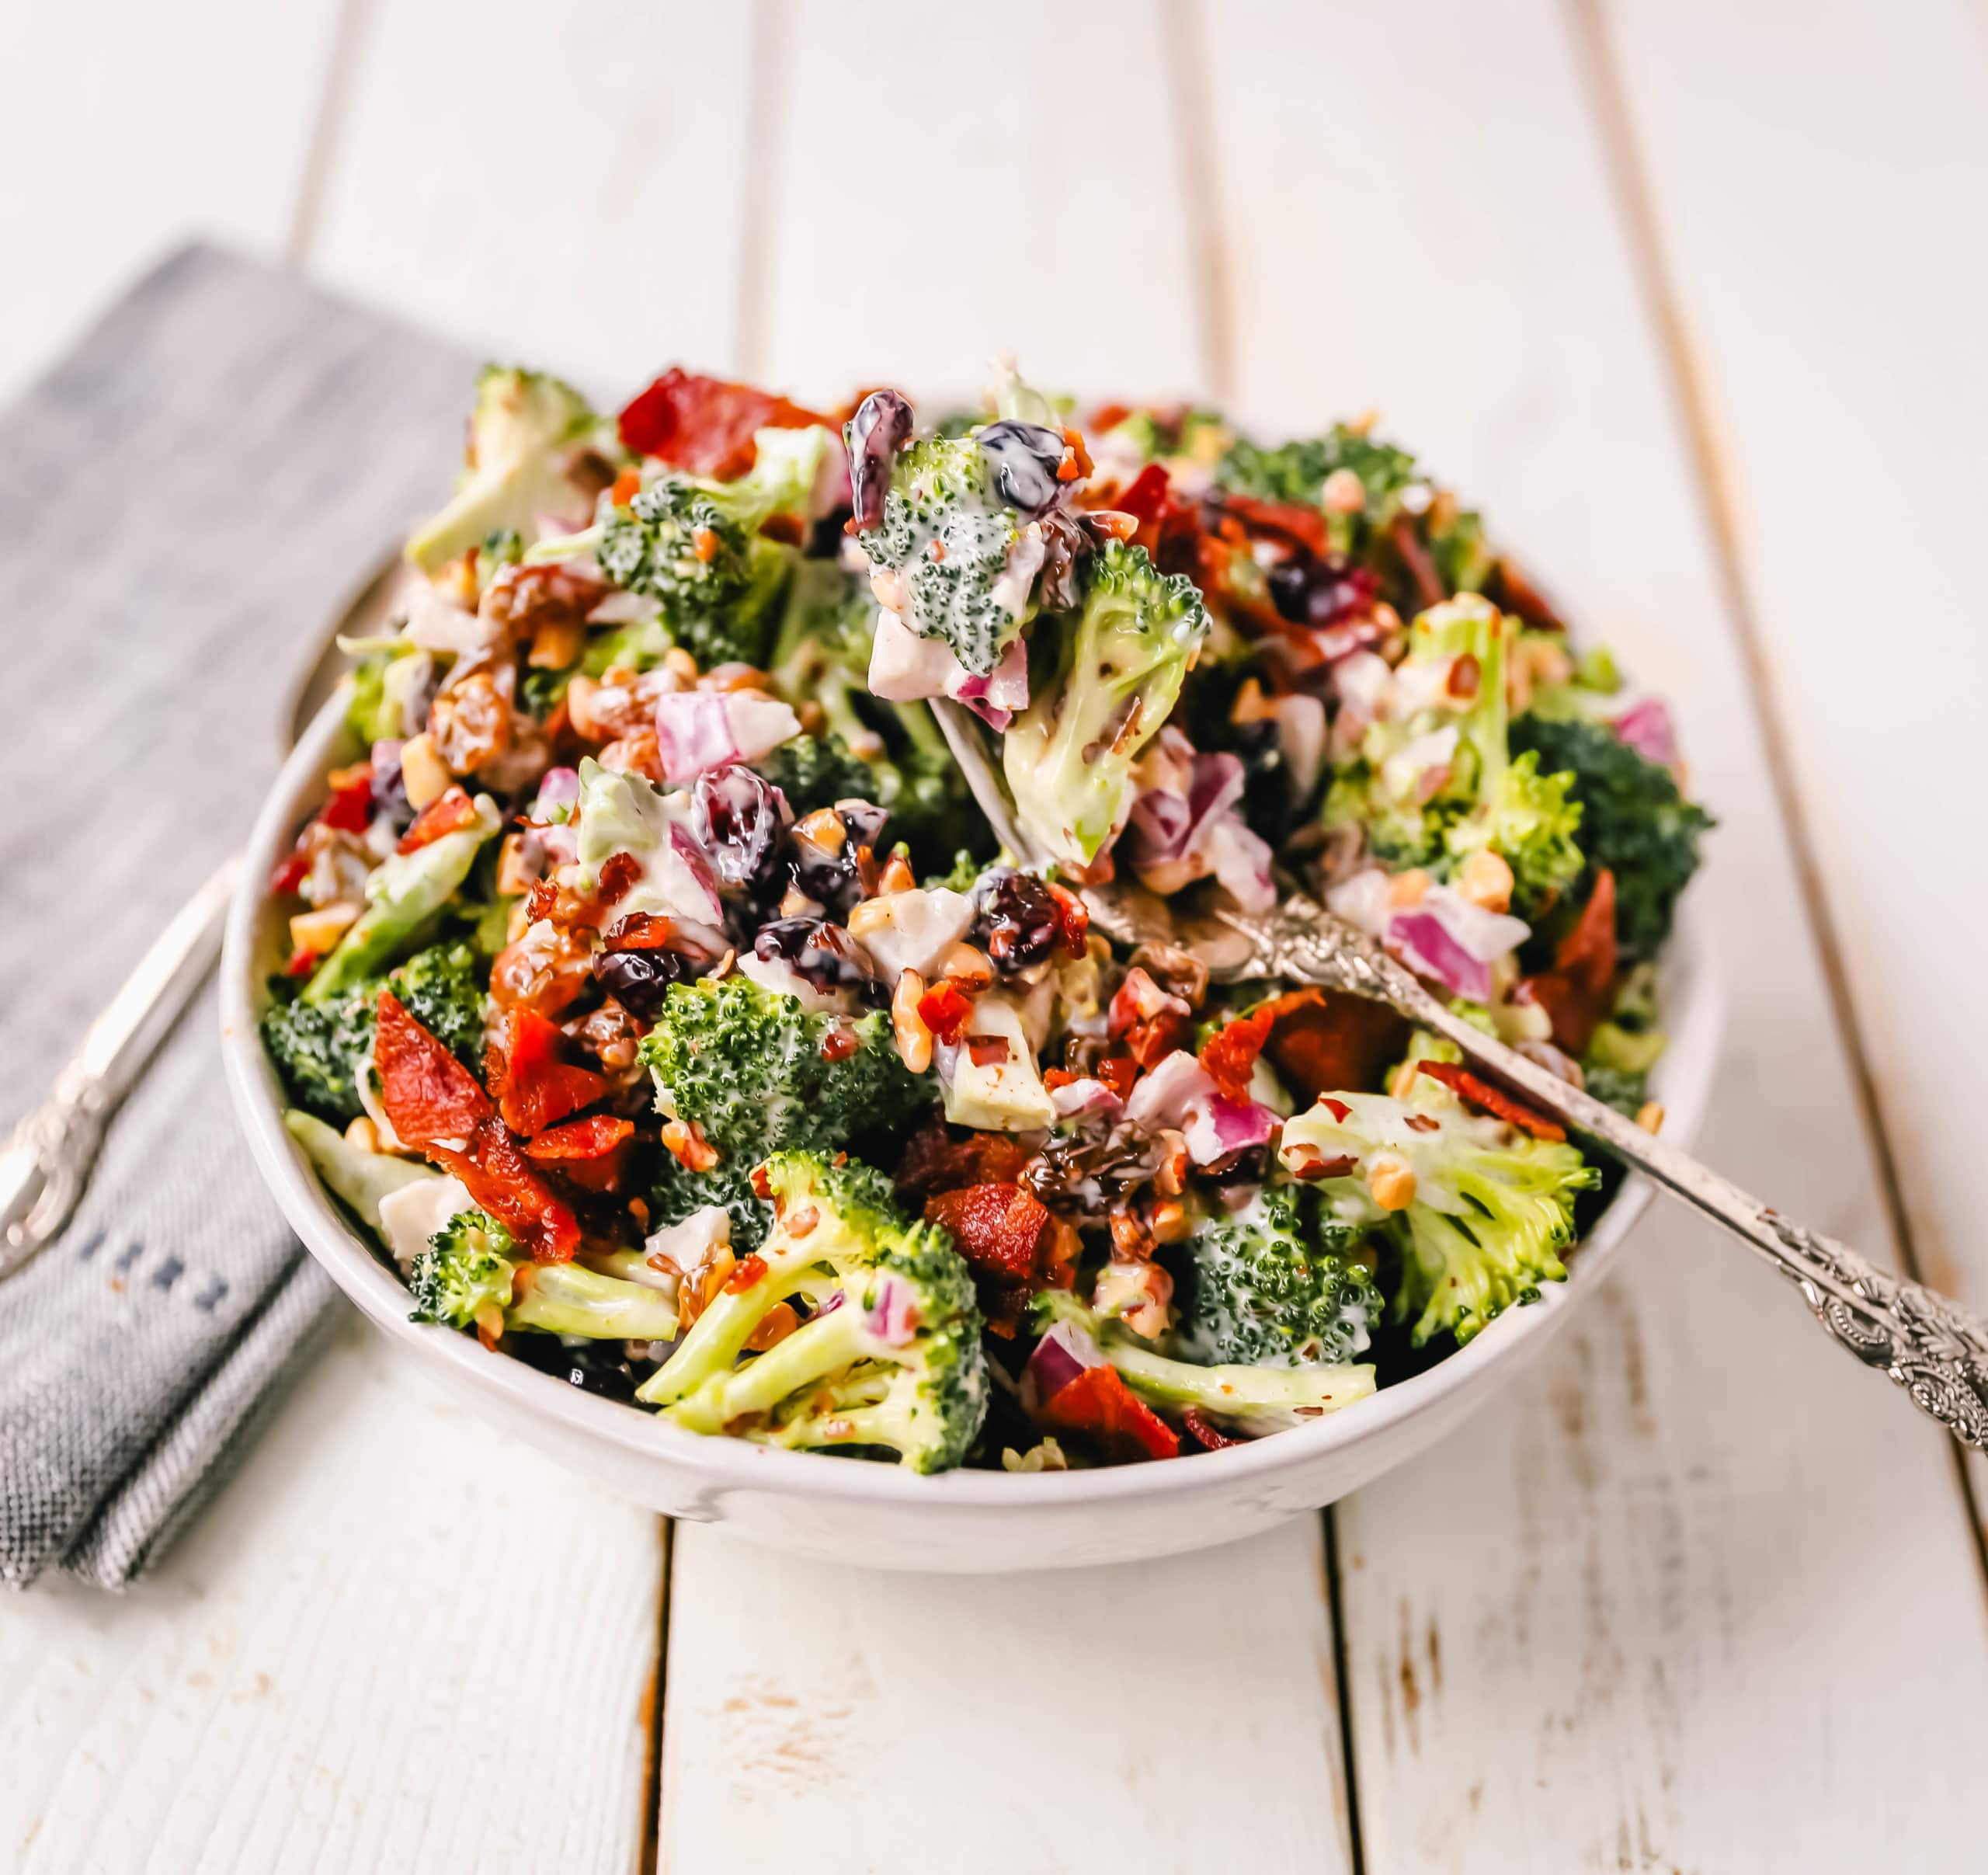 Broccoli Salad. Crunchy broccoli salad with crispy bacon, sweet dried cranberries, onion, nuts, tossed in a sweet and tangy dressing. A classic potluck side dish recipe! www.modernhoney.com #broccolisalad #sidedish #potluck #sides